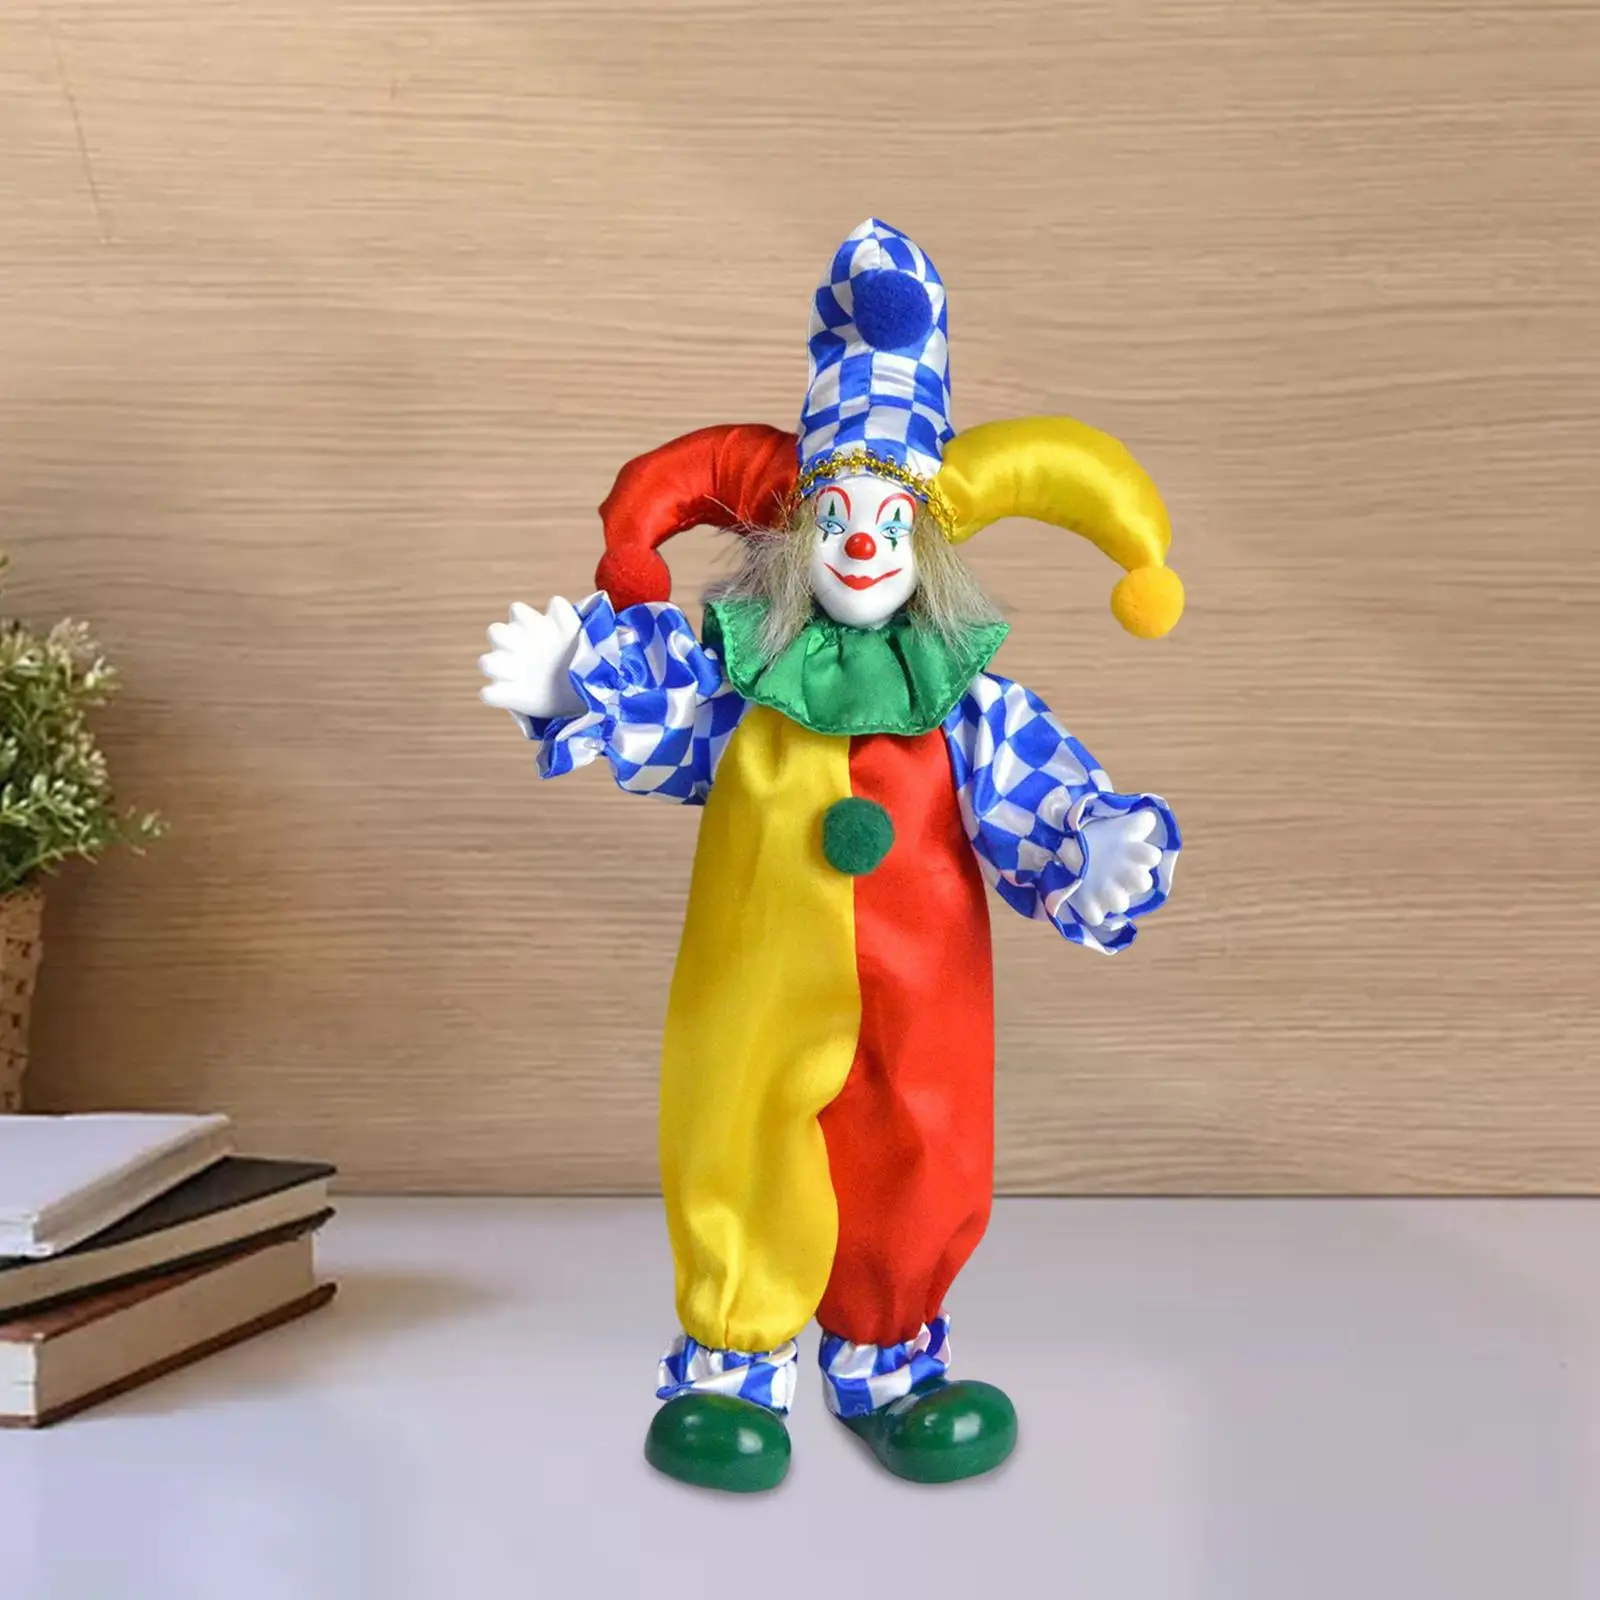 24cm Clown Doll Figure Doll Ornaments Arts Crafts Home Table Desk Decor Clown Model for Holiday Thanksgiving Gifts